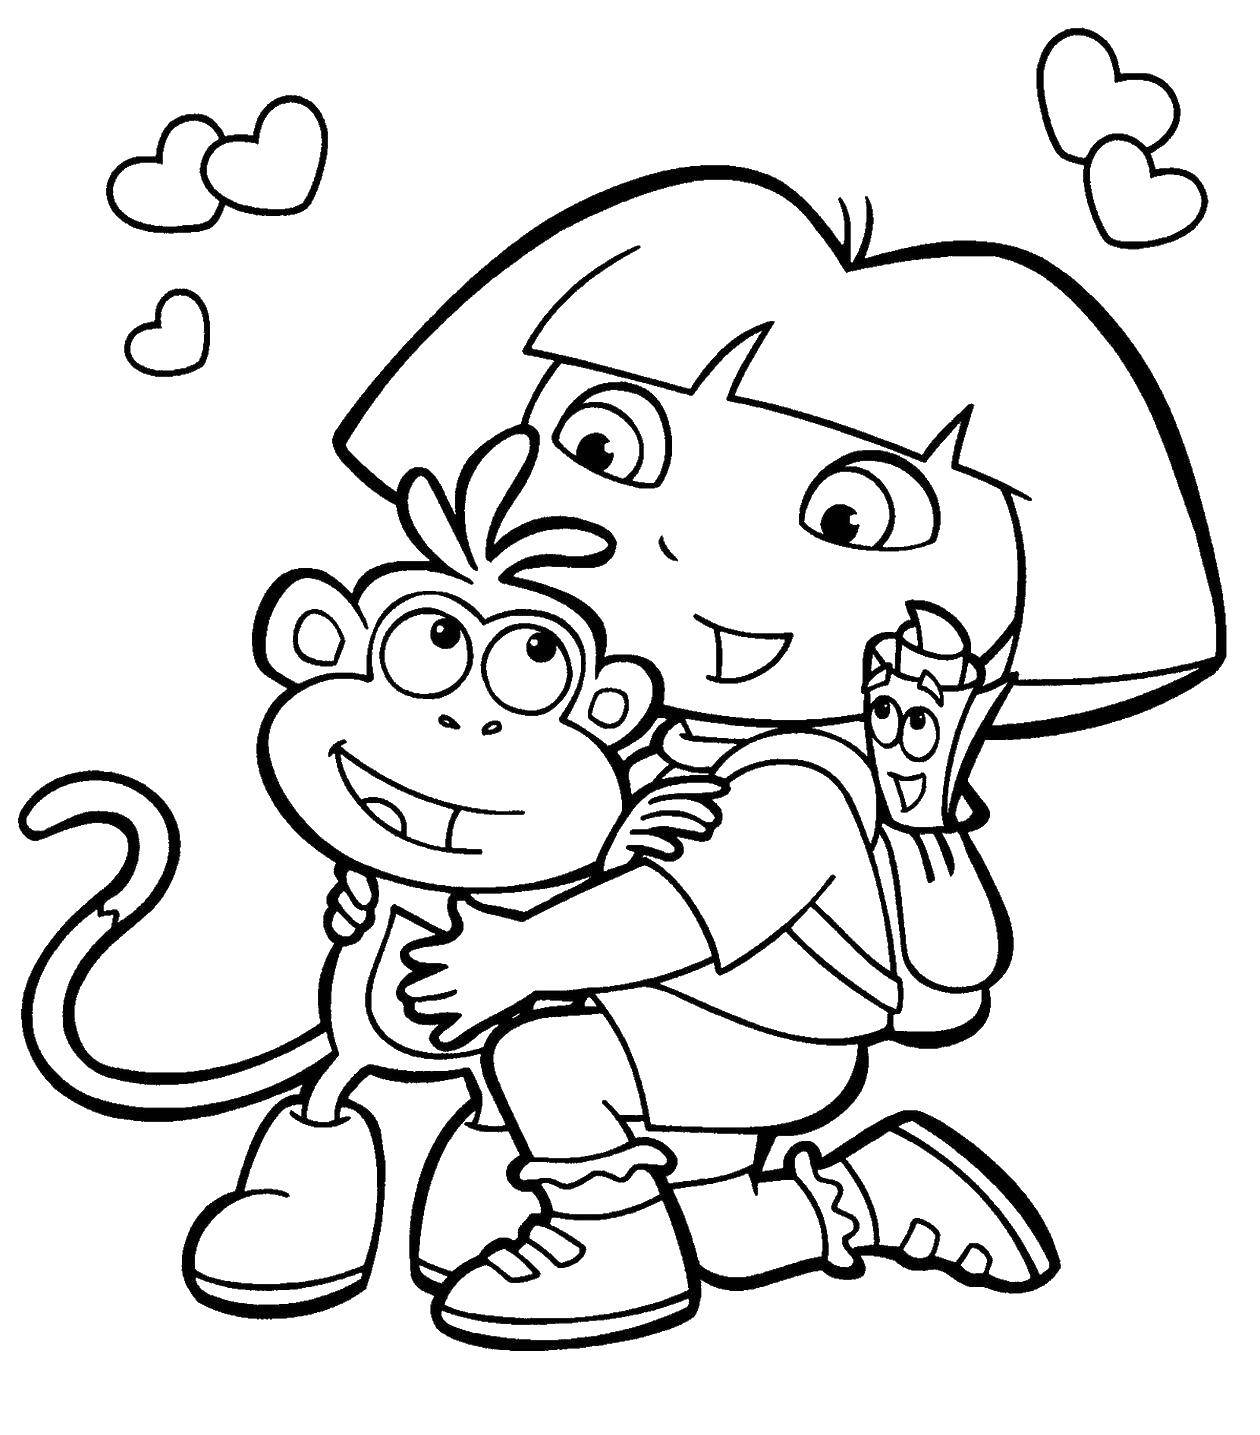 Coloring Dasha and slipper best friends. Category coloring. Tags:  Cartoon character, Dora the Explorer, Dora, Boots.